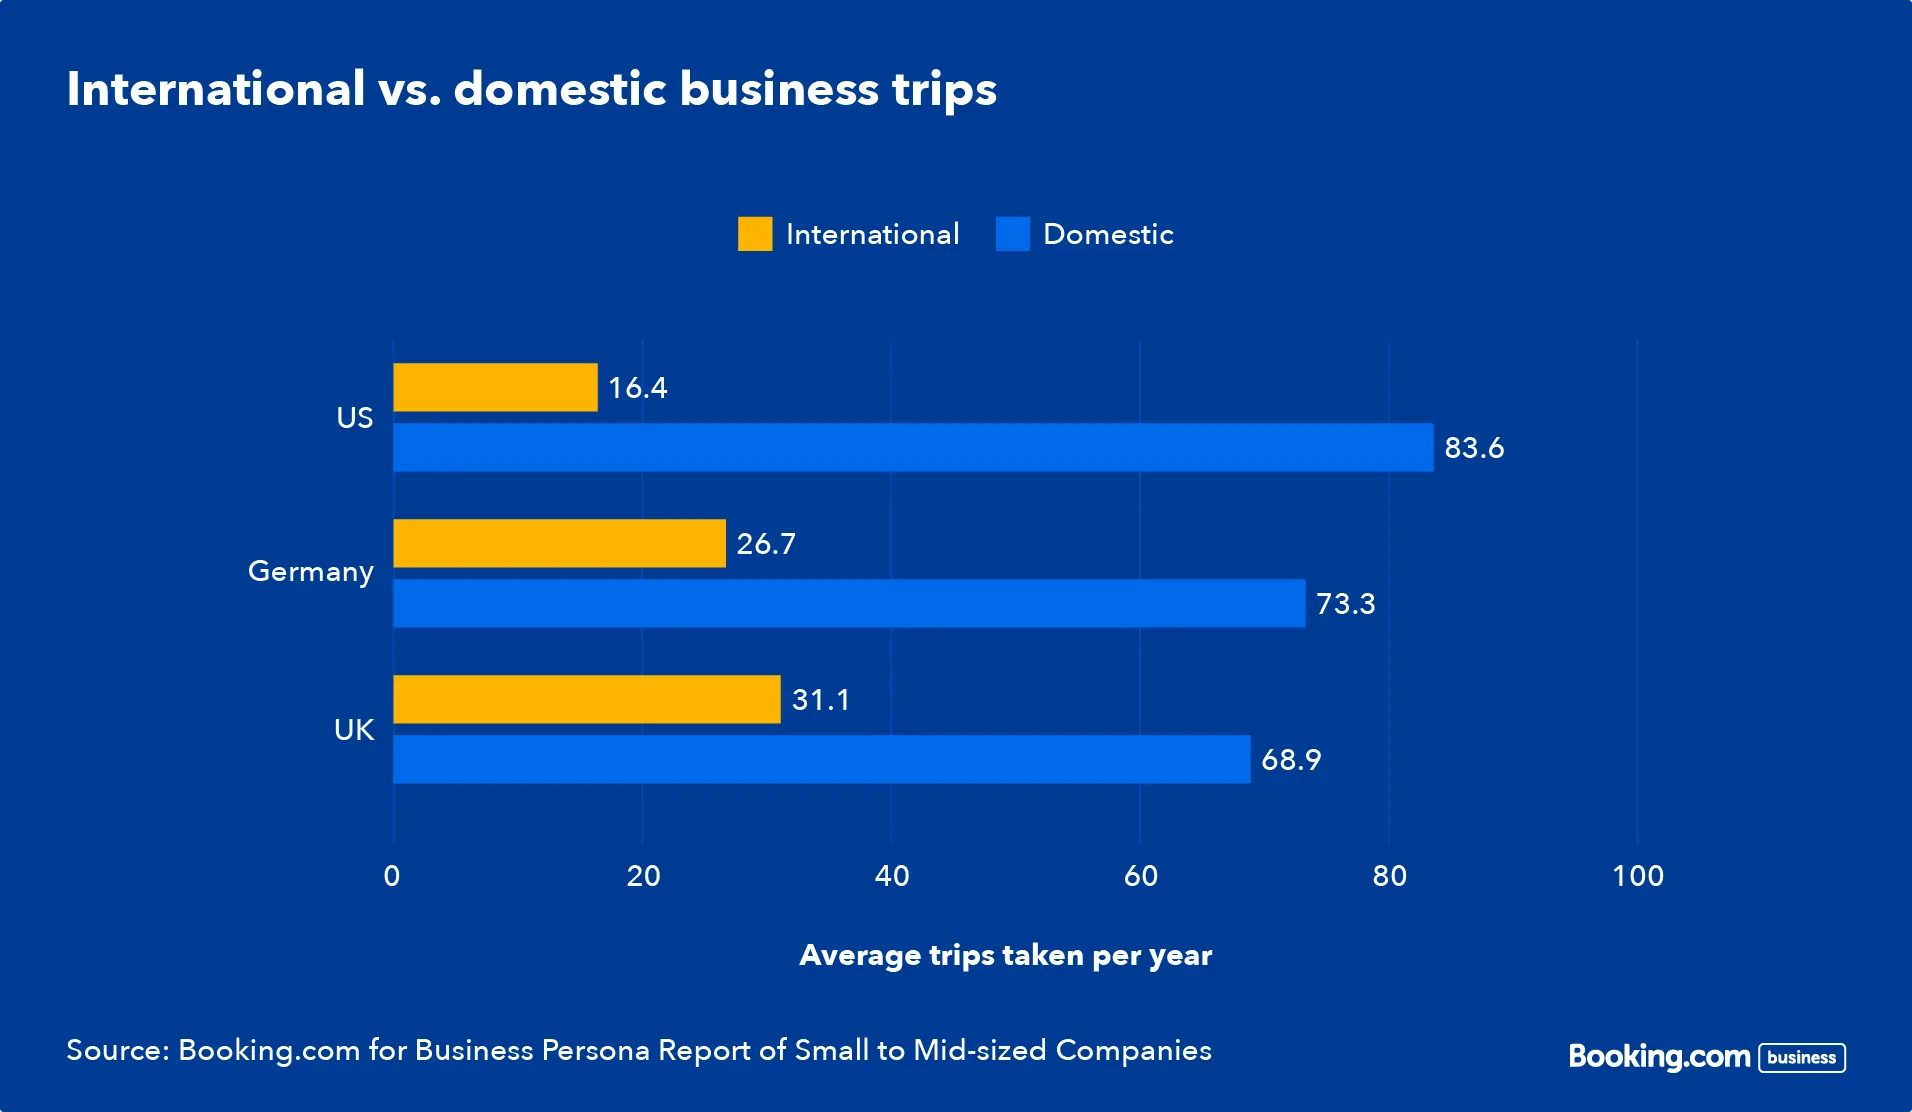 Business travel trends and behaviors of small to mid-sized companies